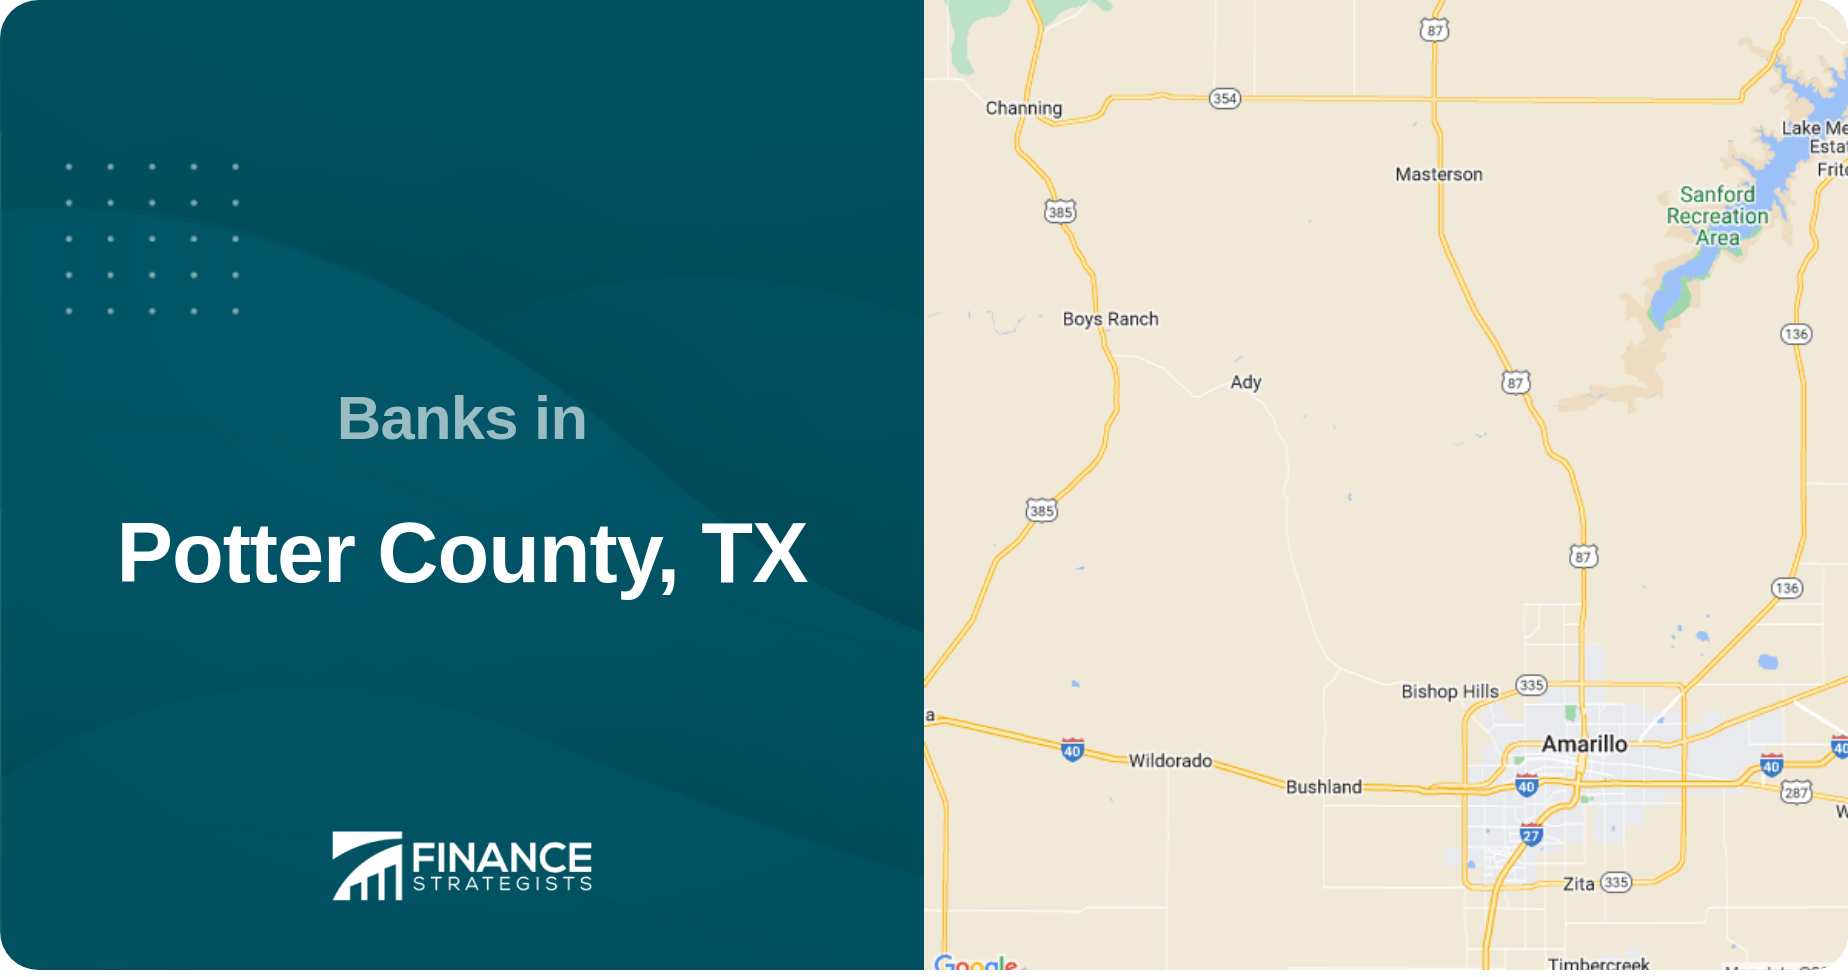 Banks in Potter County, TX